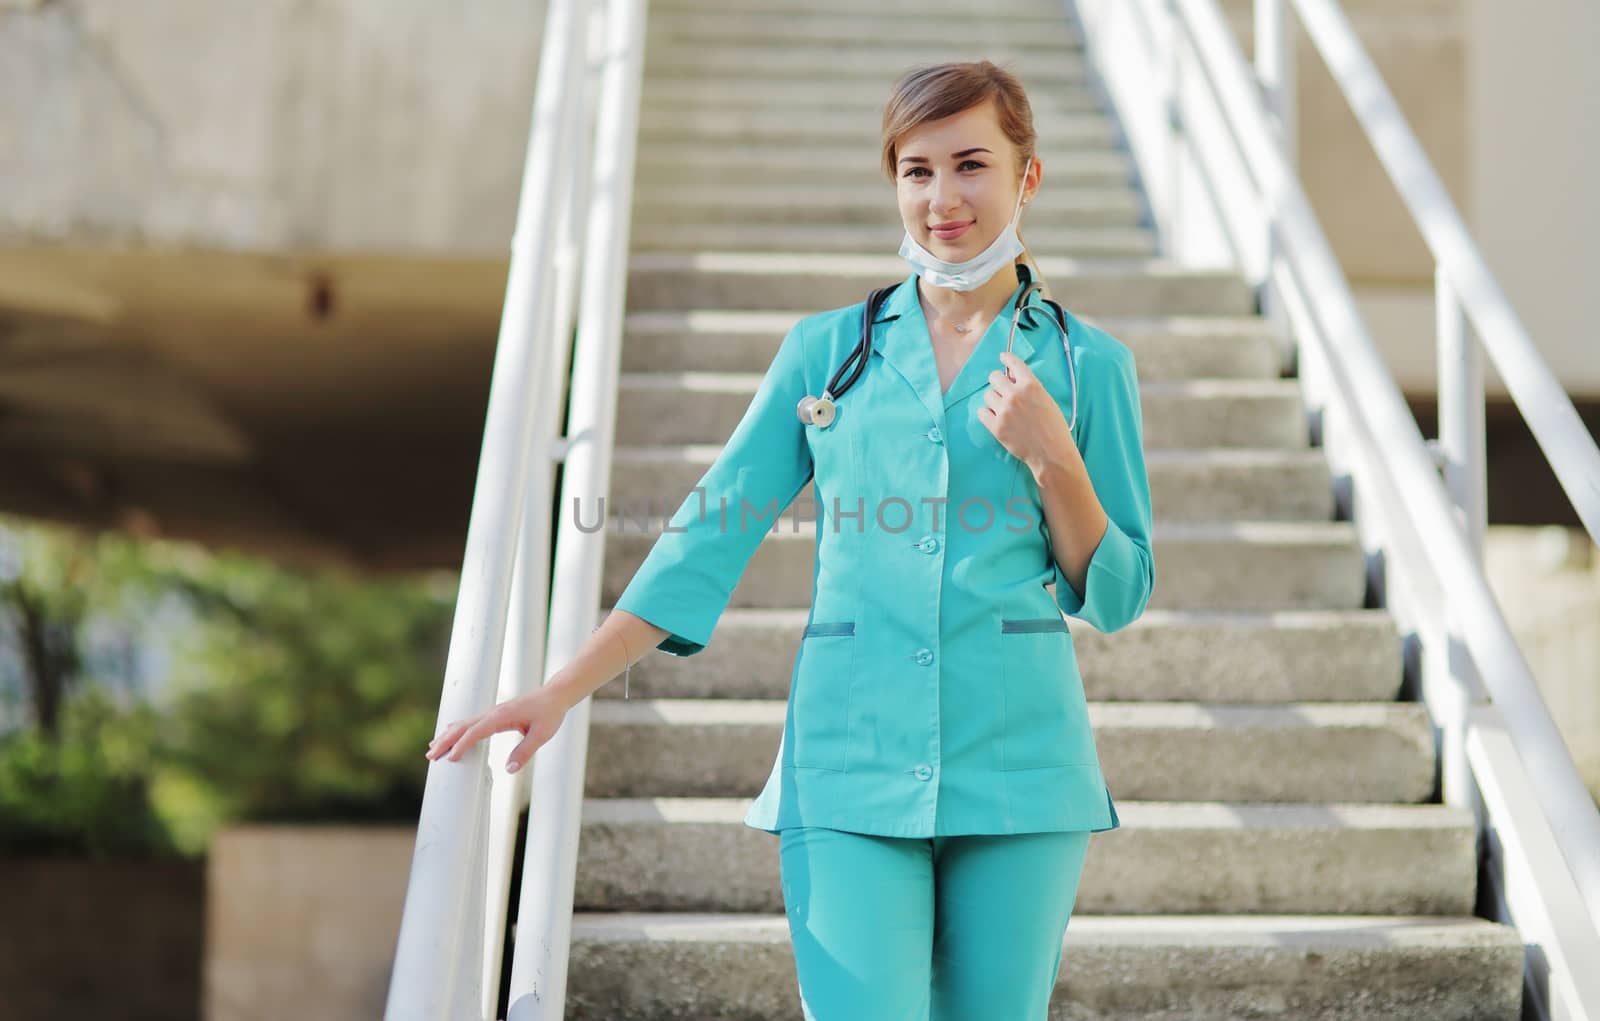 Female doctor or nurse in a protective face mask walking up the stairs by selinsmo